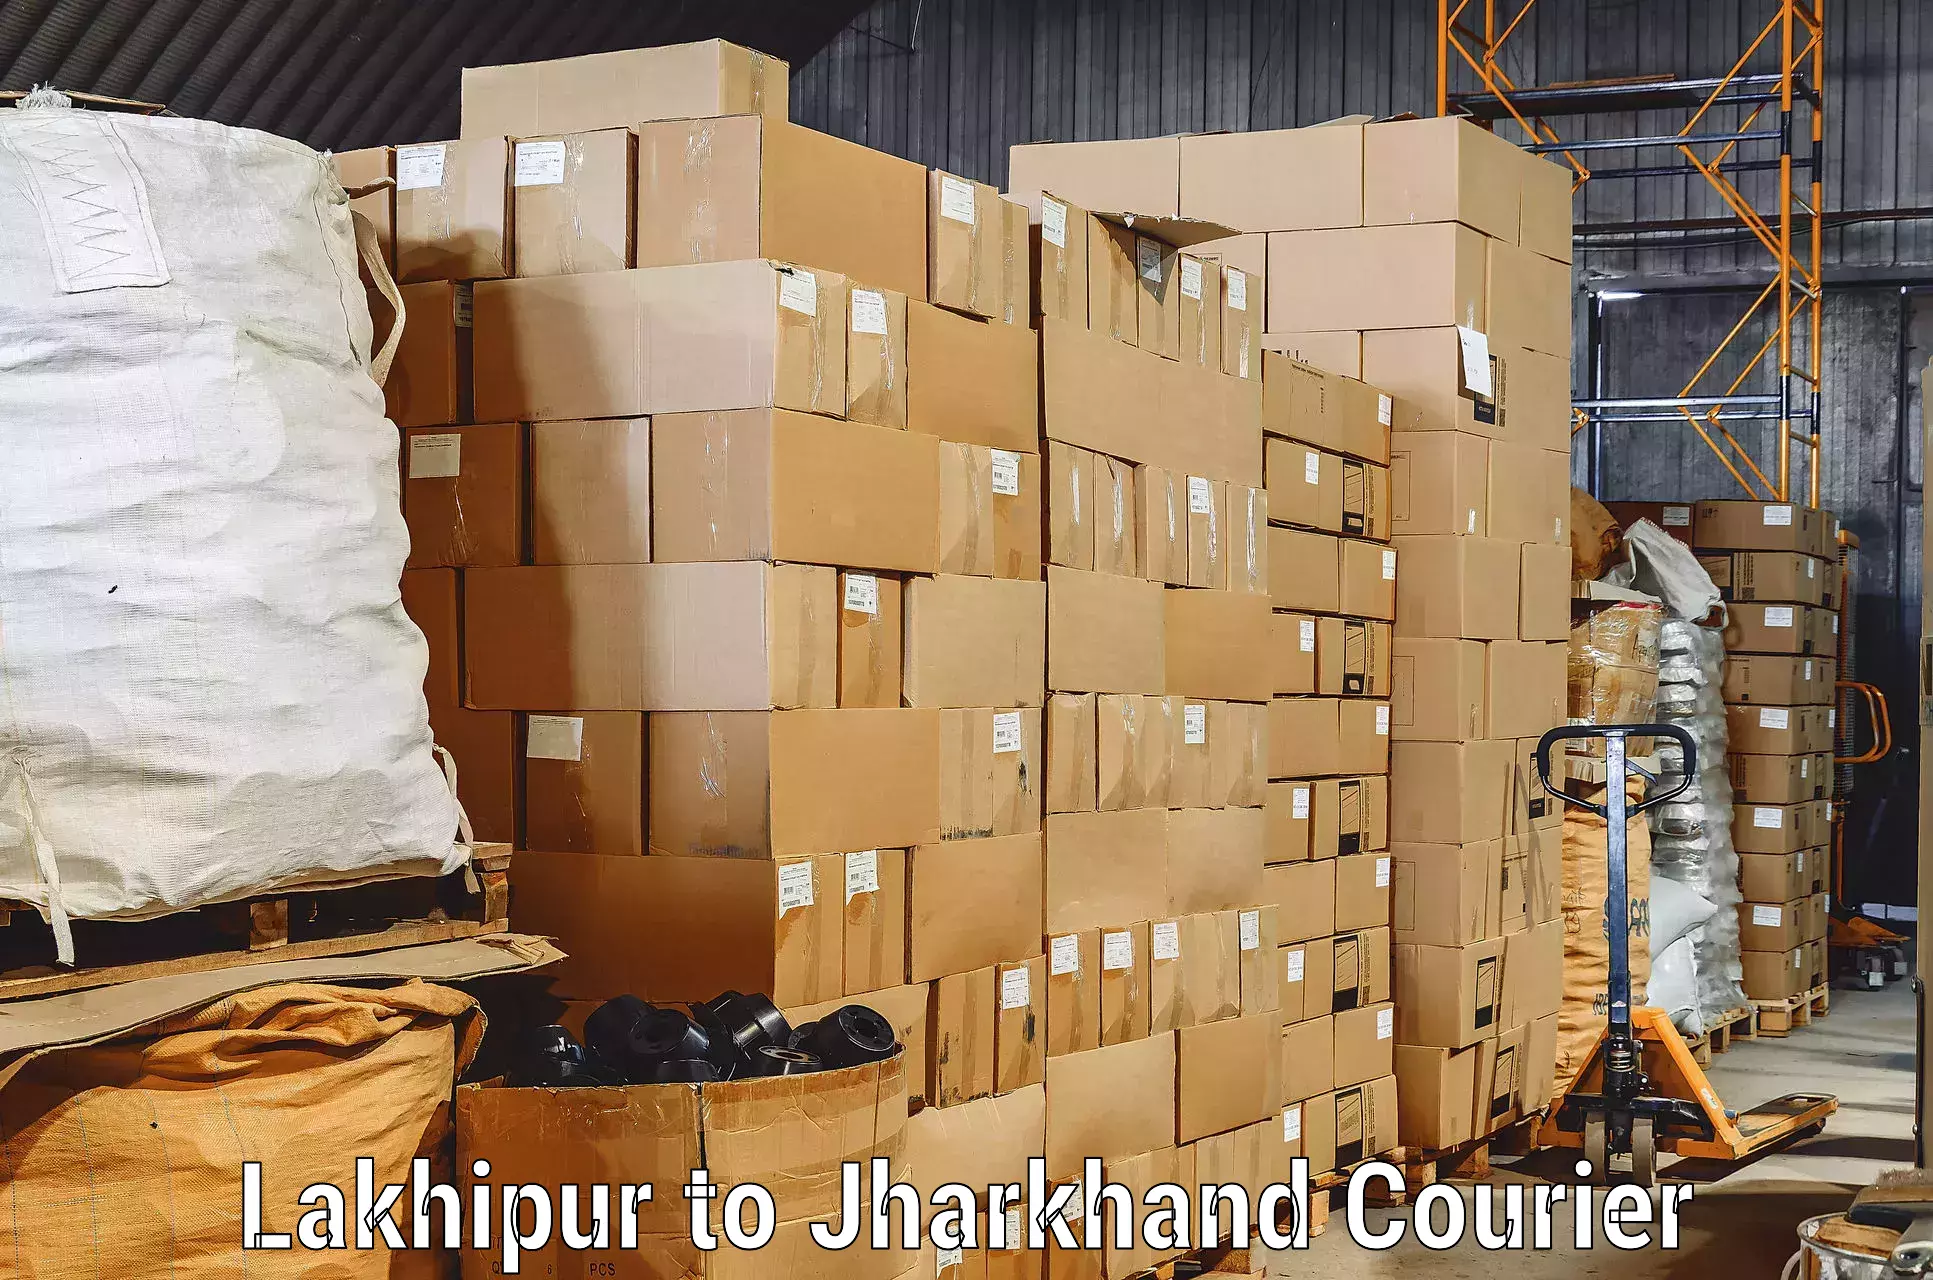 Trusted relocation experts Lakhipur to Latehar